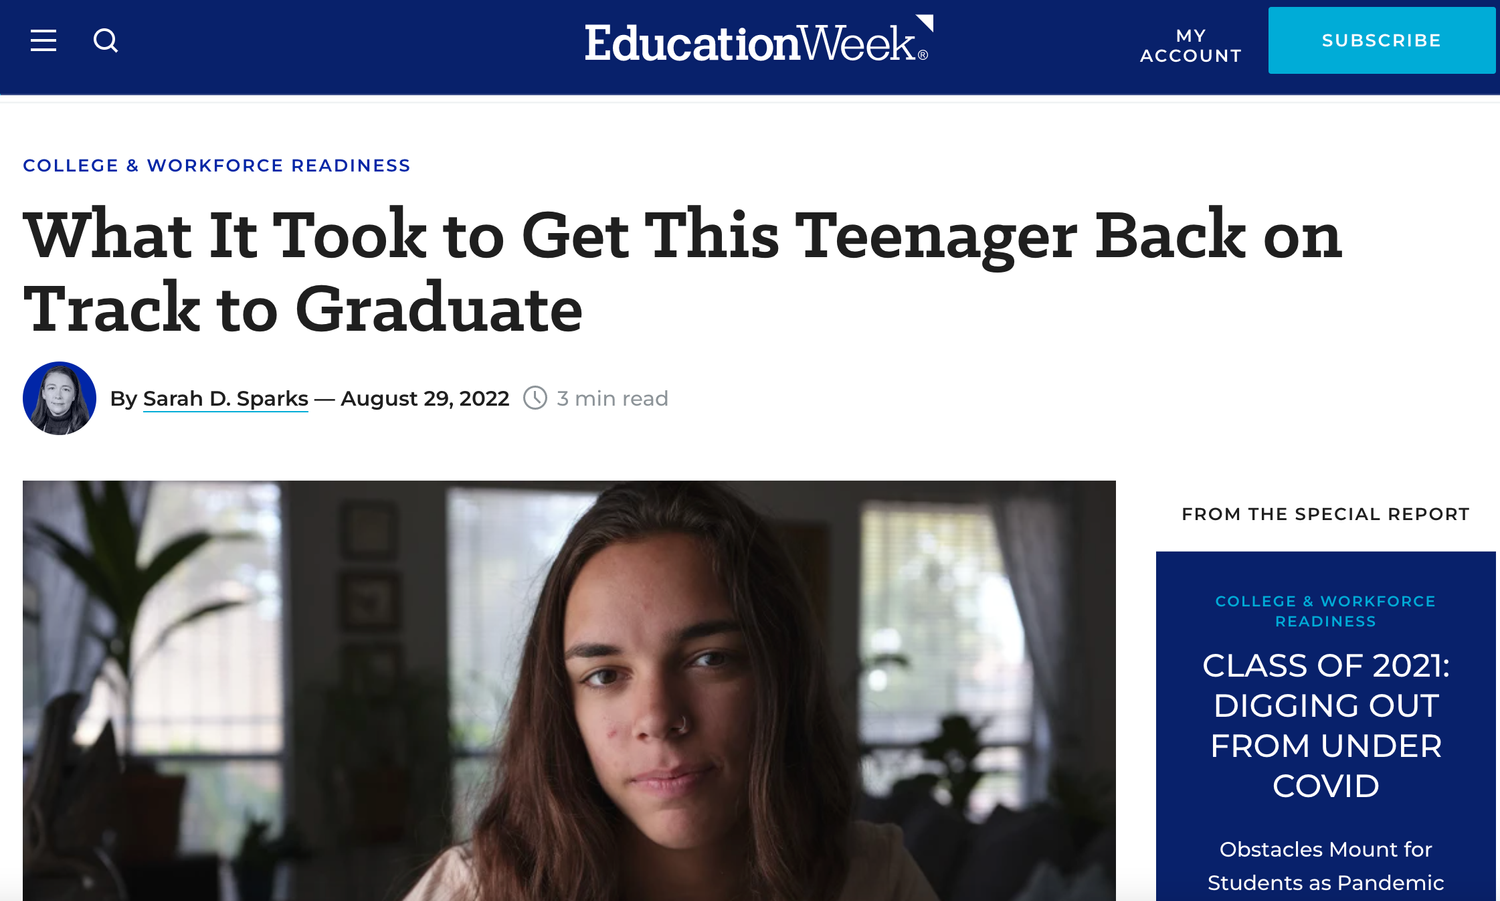 What It Took to Get This Teenager Back on Track to Graduate